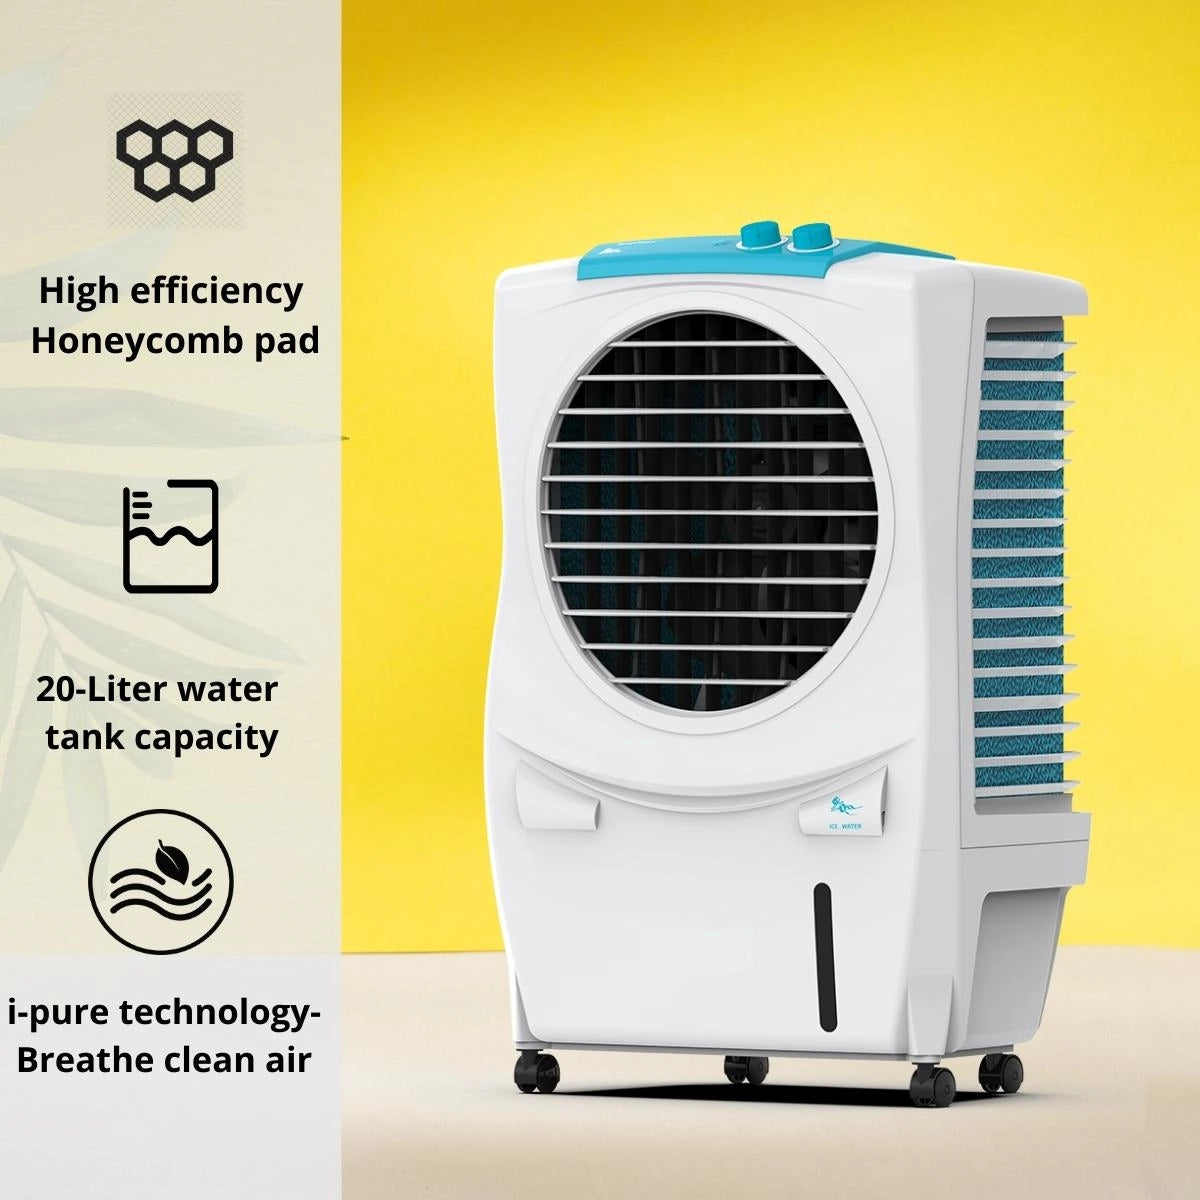 Ice Cube 20 Personal Room Air Cooler With Powerful Fan